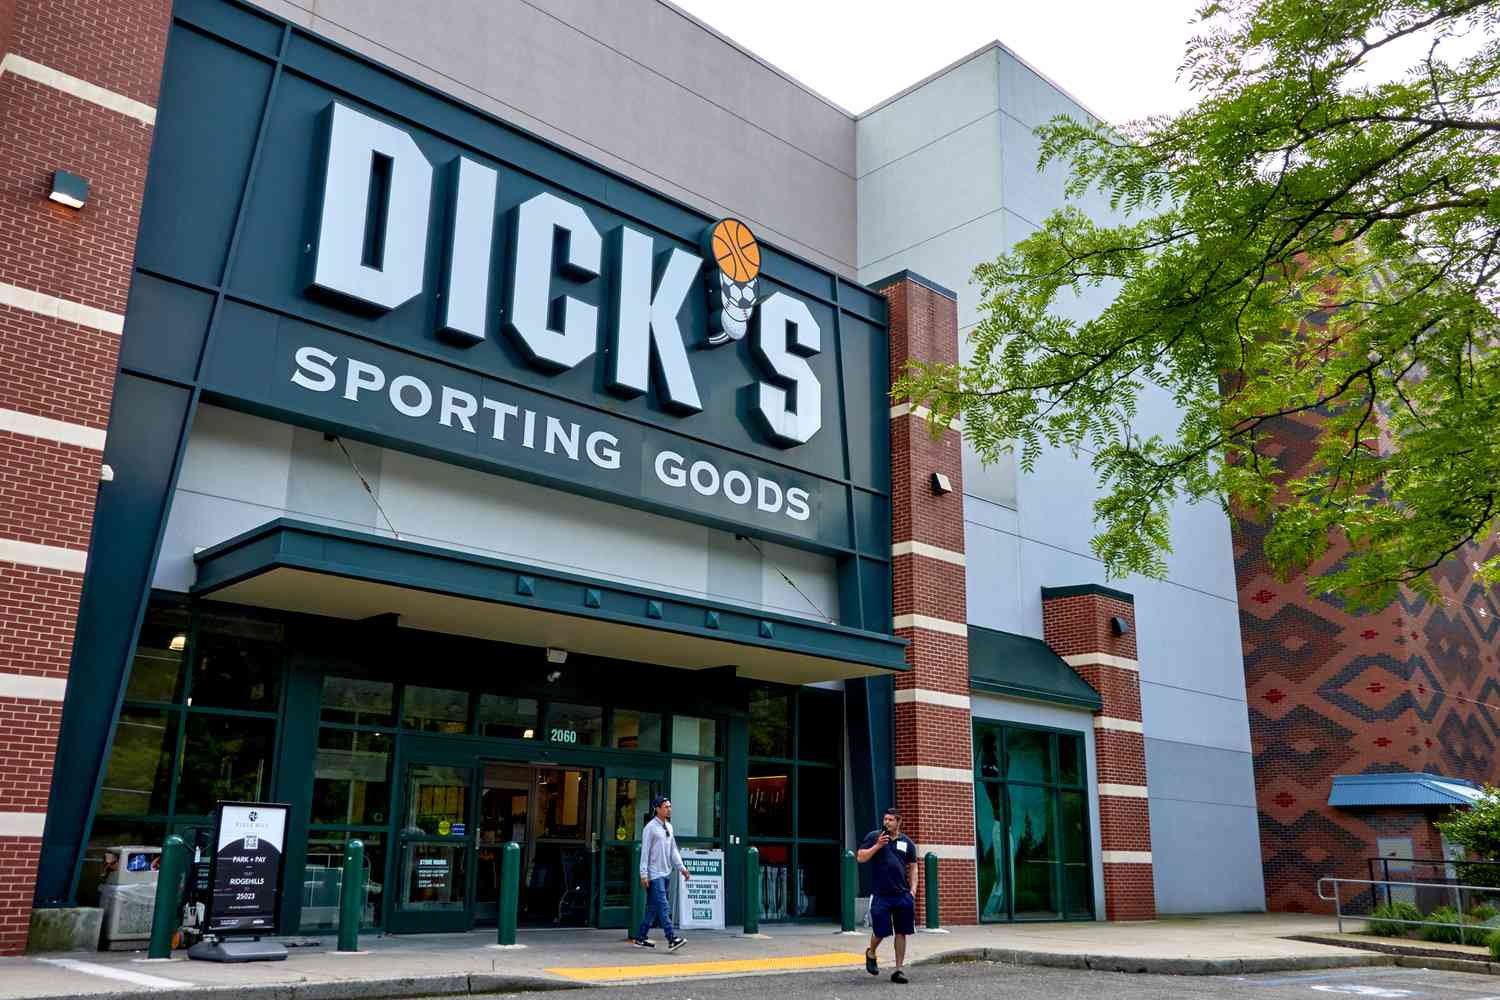  Dick's Sporting Goods Stock Soars as Shoppers Increase, Spend More 